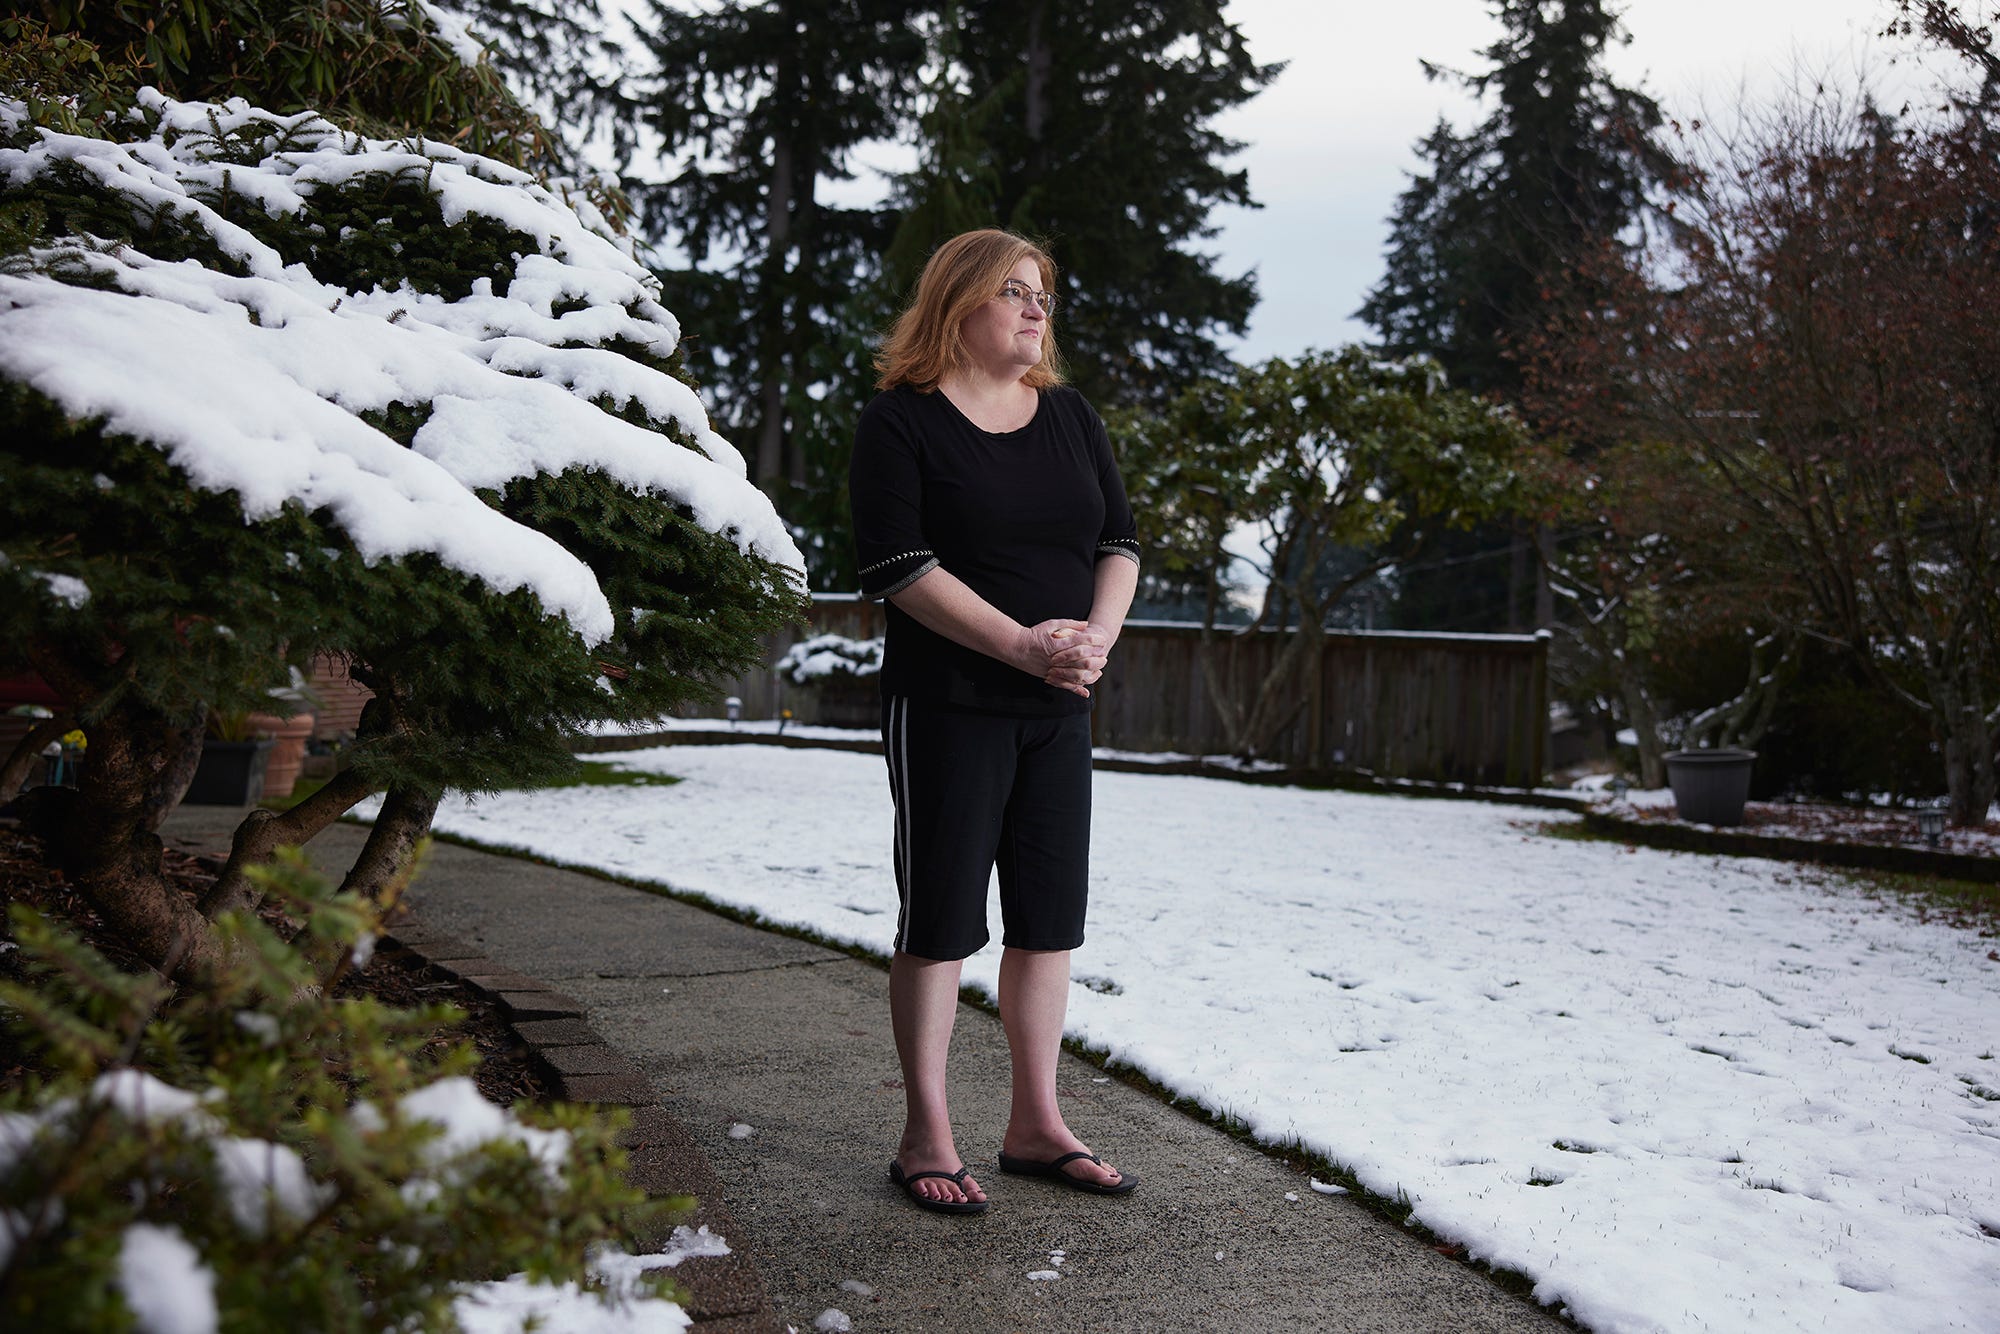 Pamela Costa, of Tacoma, Washington, has mutation on the same gene as Pete. But in her case, it causes "man on fire" disease, officially called erythromelalgia, which triggers burning-like sensations when she's exposed to typical room temperatures and other triggers. She dresses lightly, even in the cold.